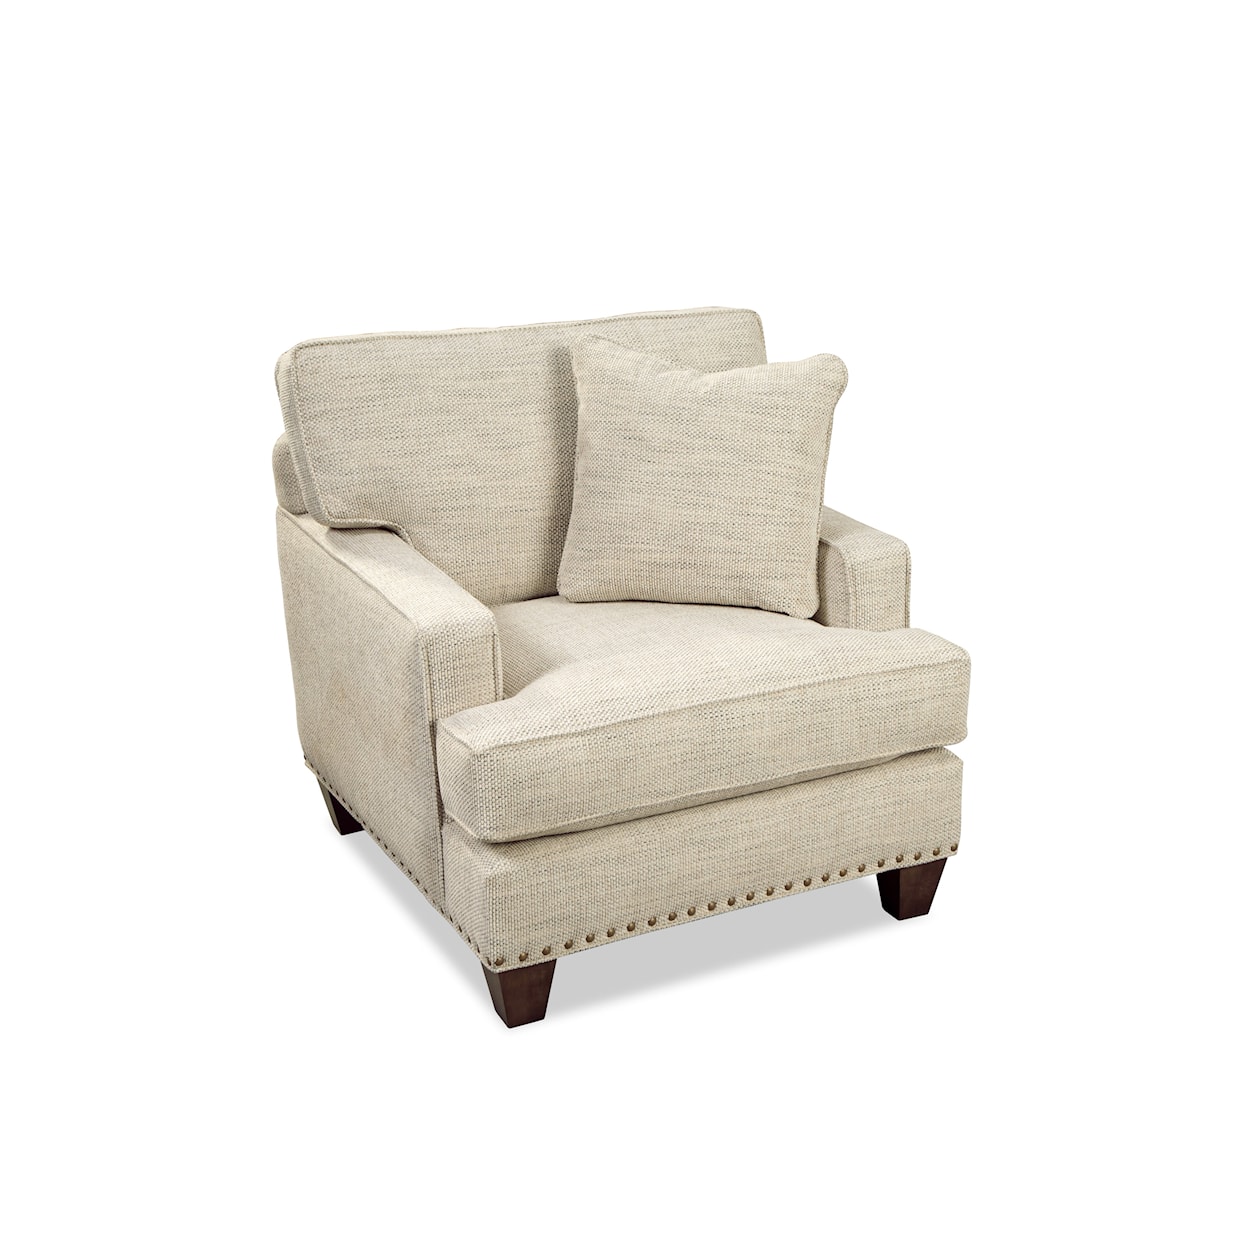 Craftmaster C9 Custom Collection Custom Accent Chair